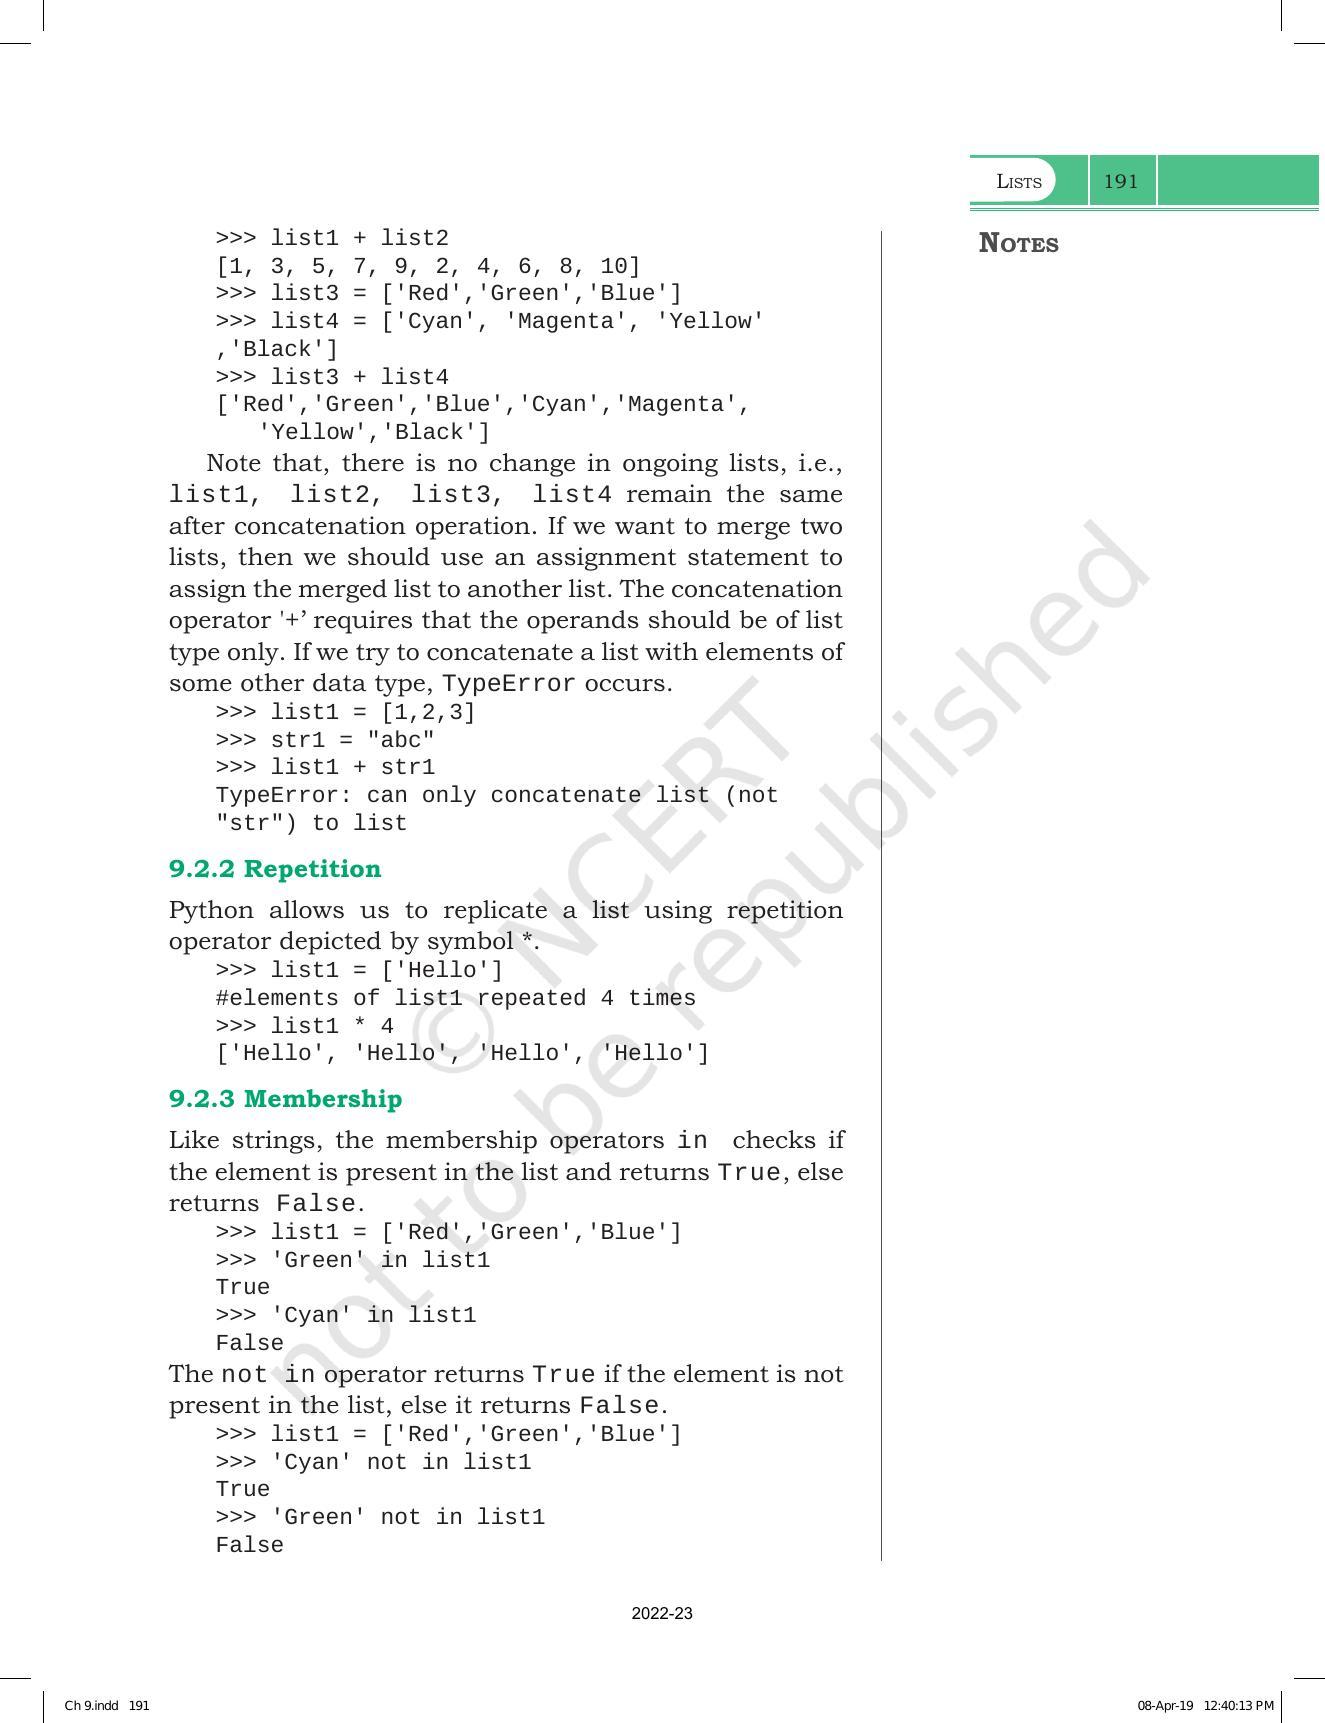 NCERT Book for Class 11 Computer Science Chapter 9 Lists - Page 3